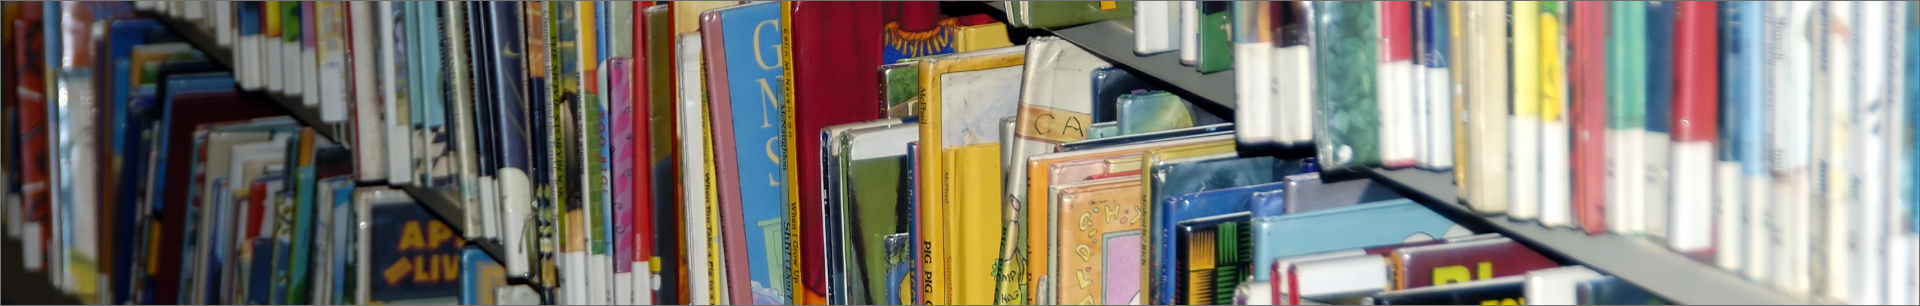 A library shelf filled with children's books.